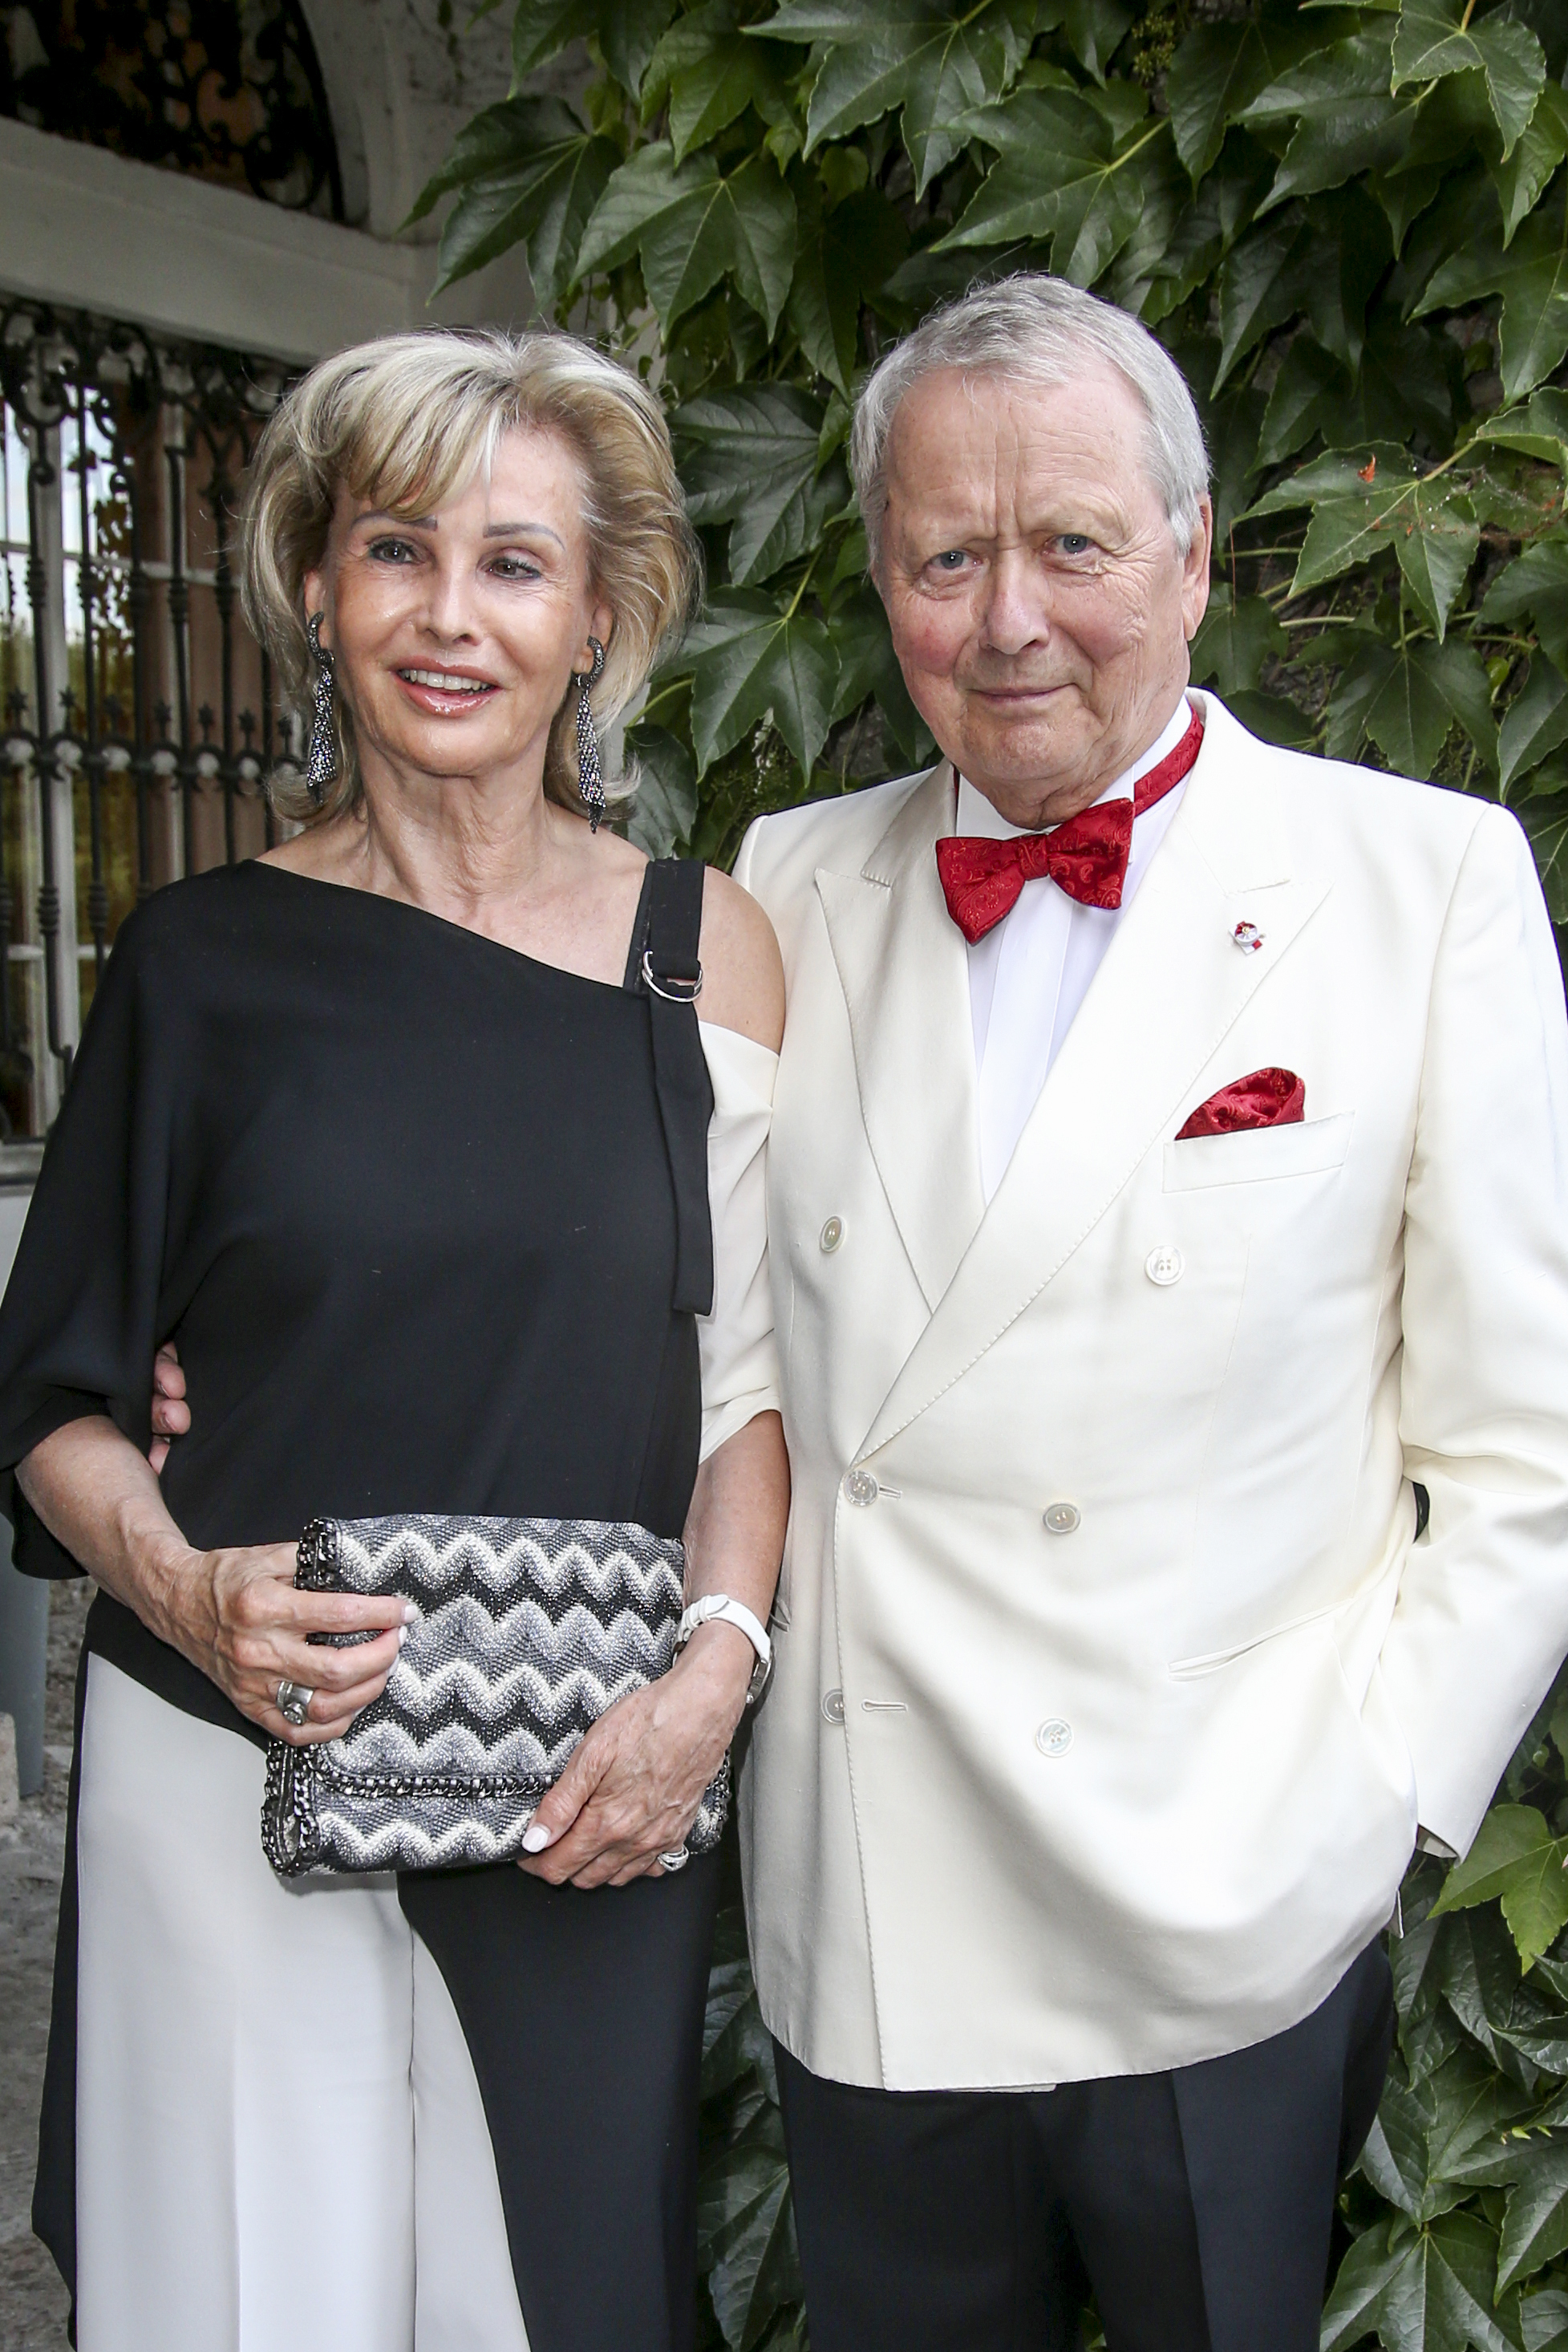 Wolfgang Porsche and his partner Claudia at Schloss Leopoldskron on July 26, 2018 in Salzburg, Austria. | Source: Getty Images